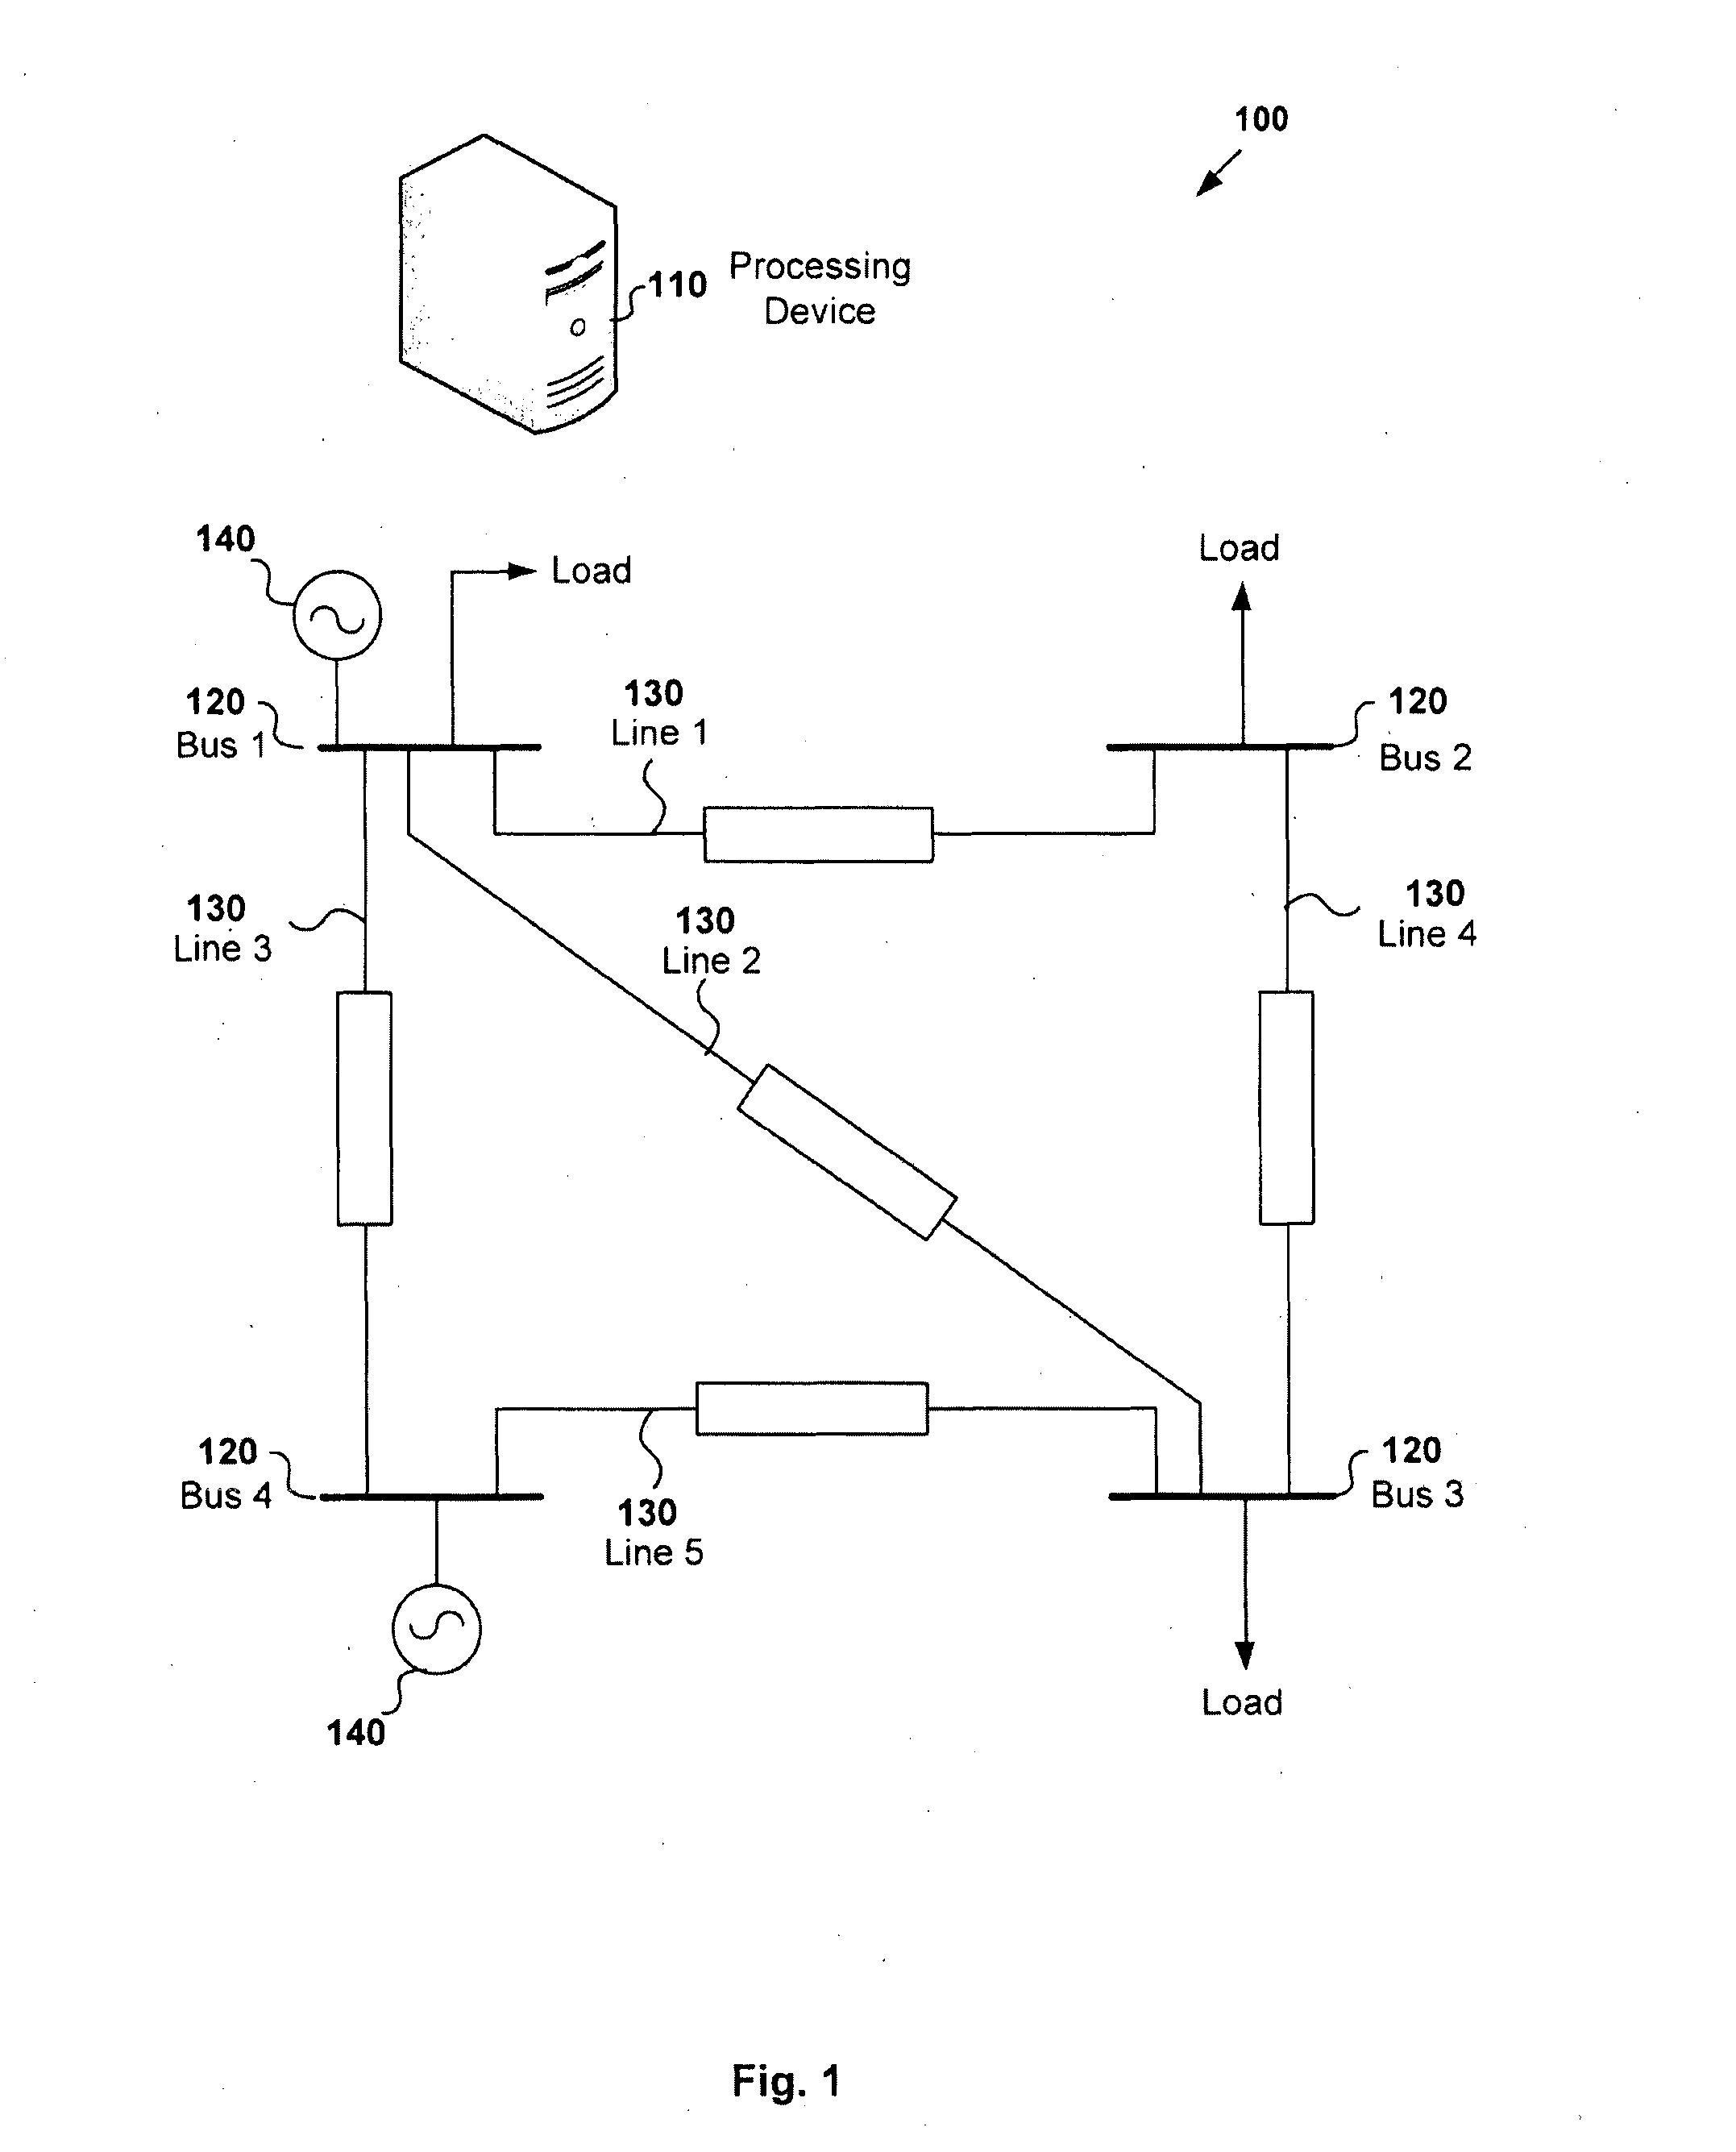 Alternating current (AC) power flow analysis in an electrical power network